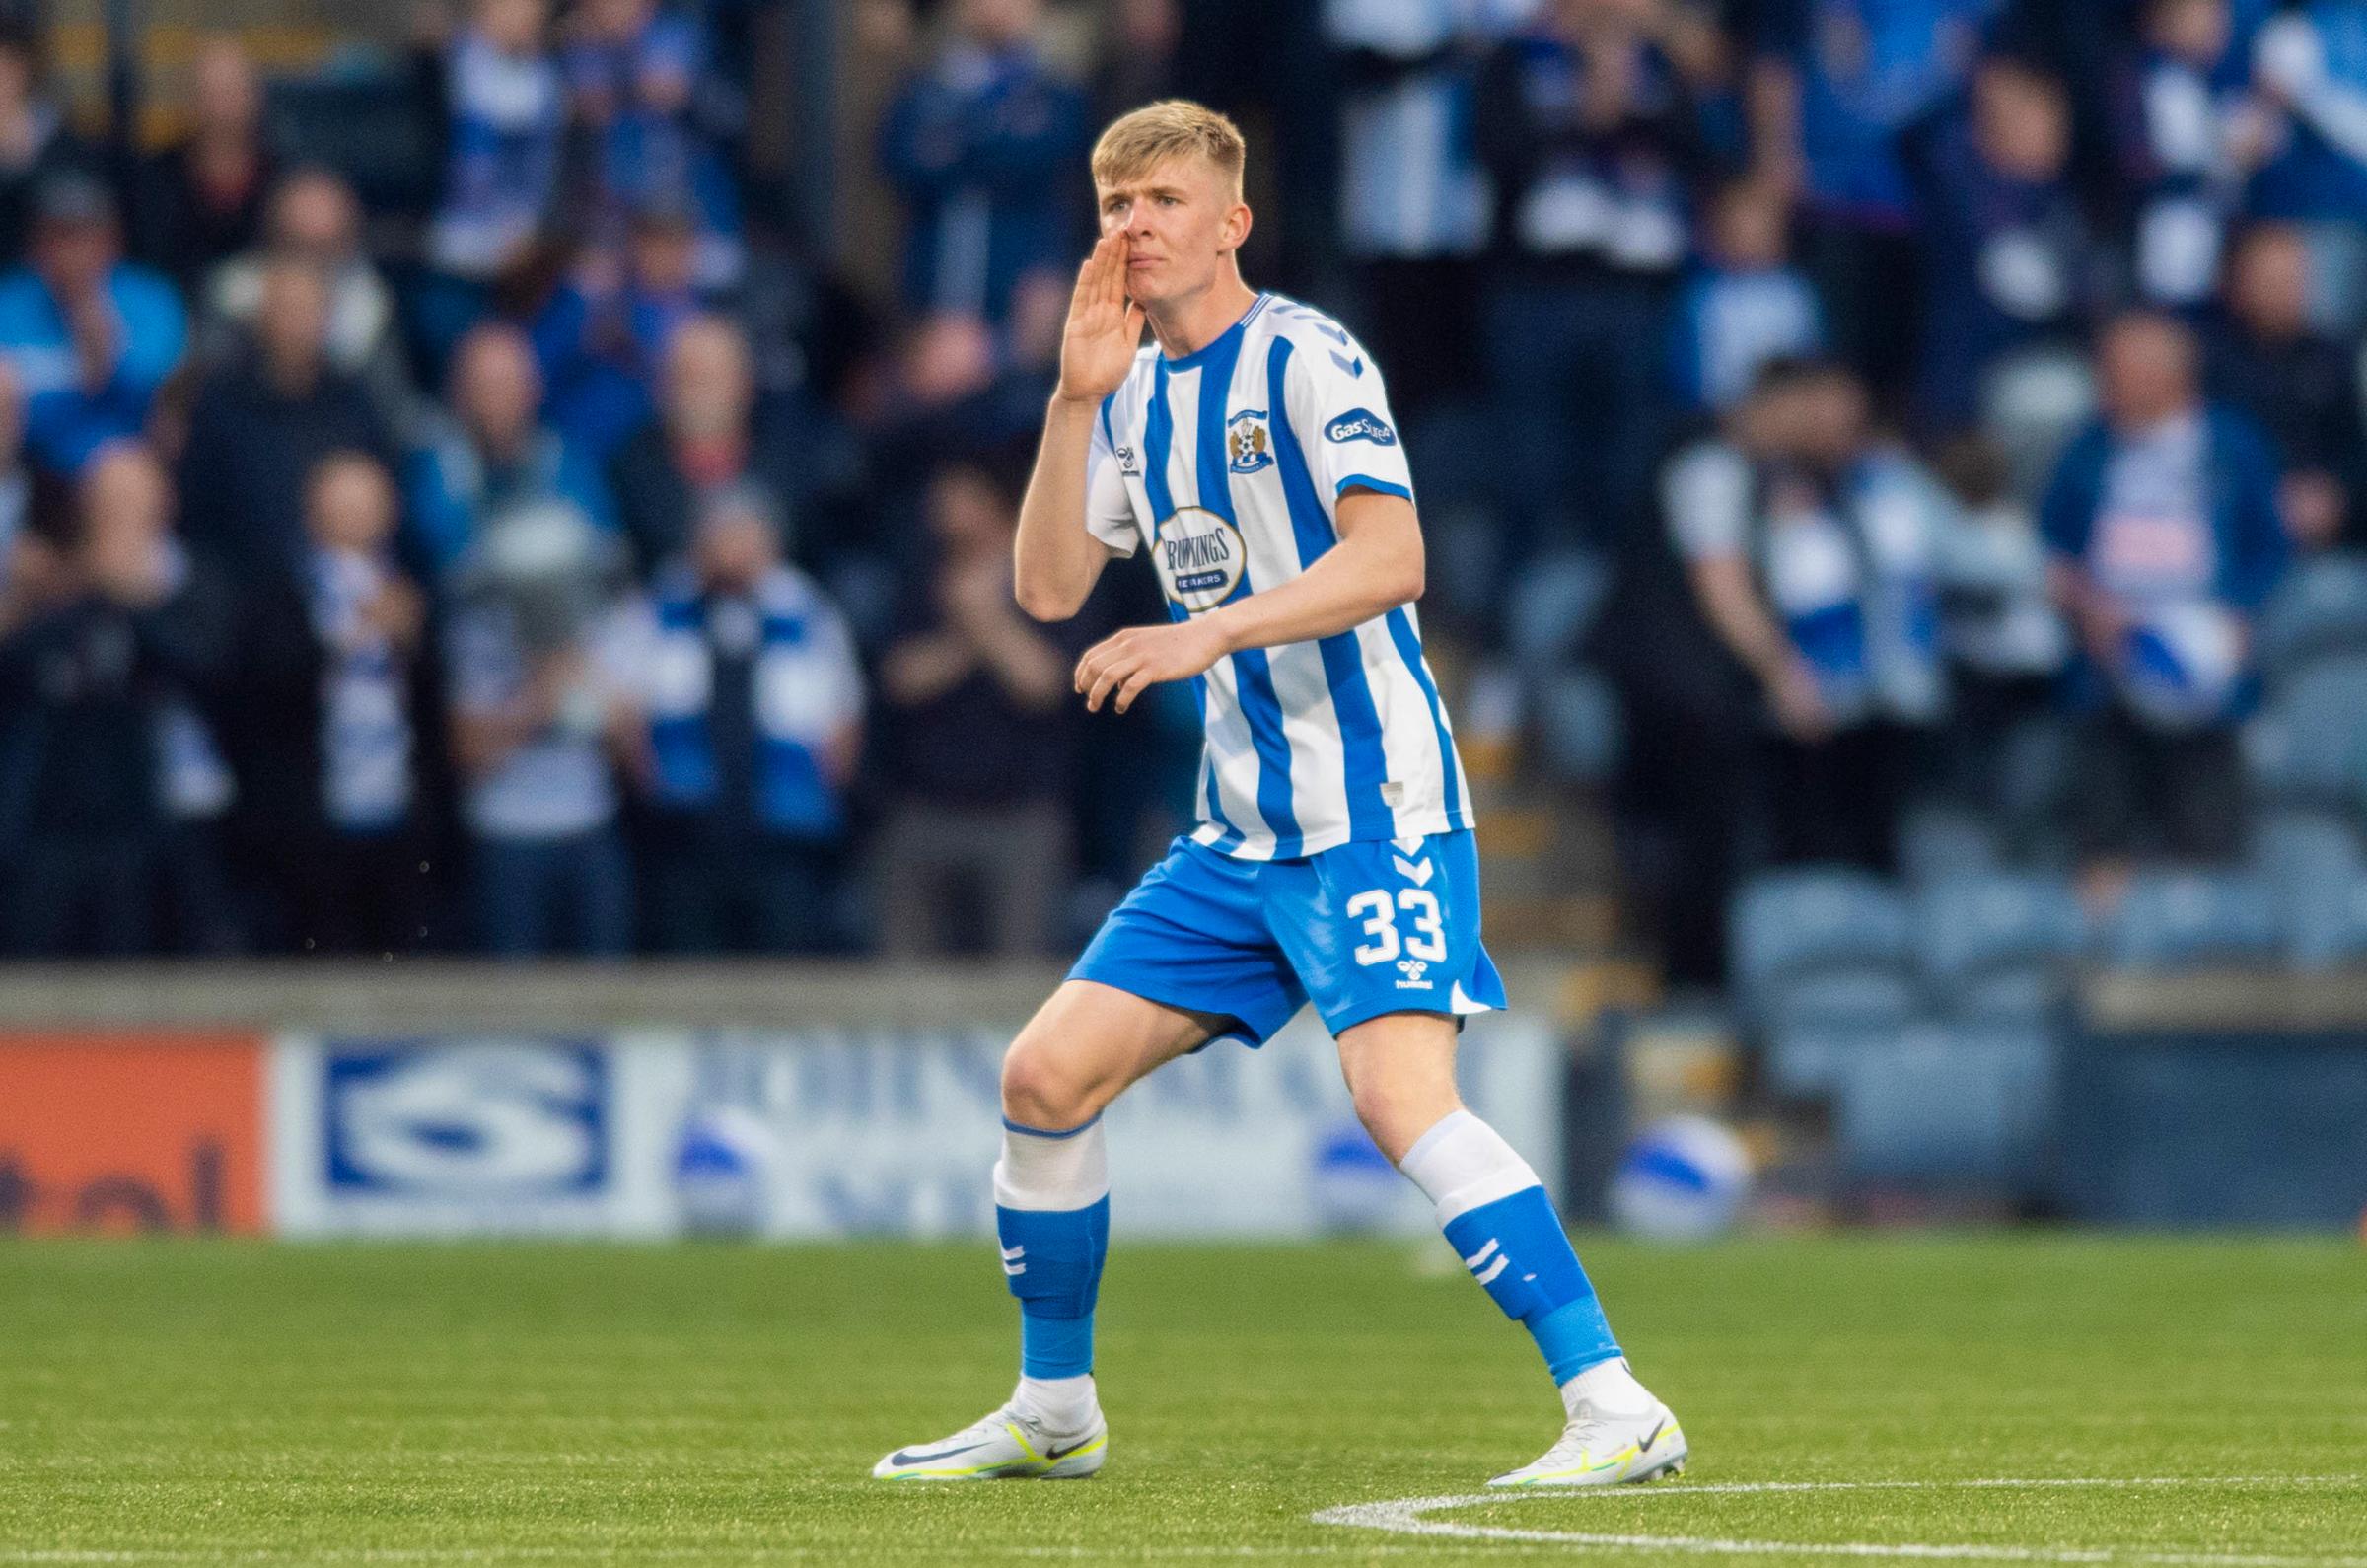 Kilmarnock starlet Charlie McArthur set to make future decision with host of English clubs interested